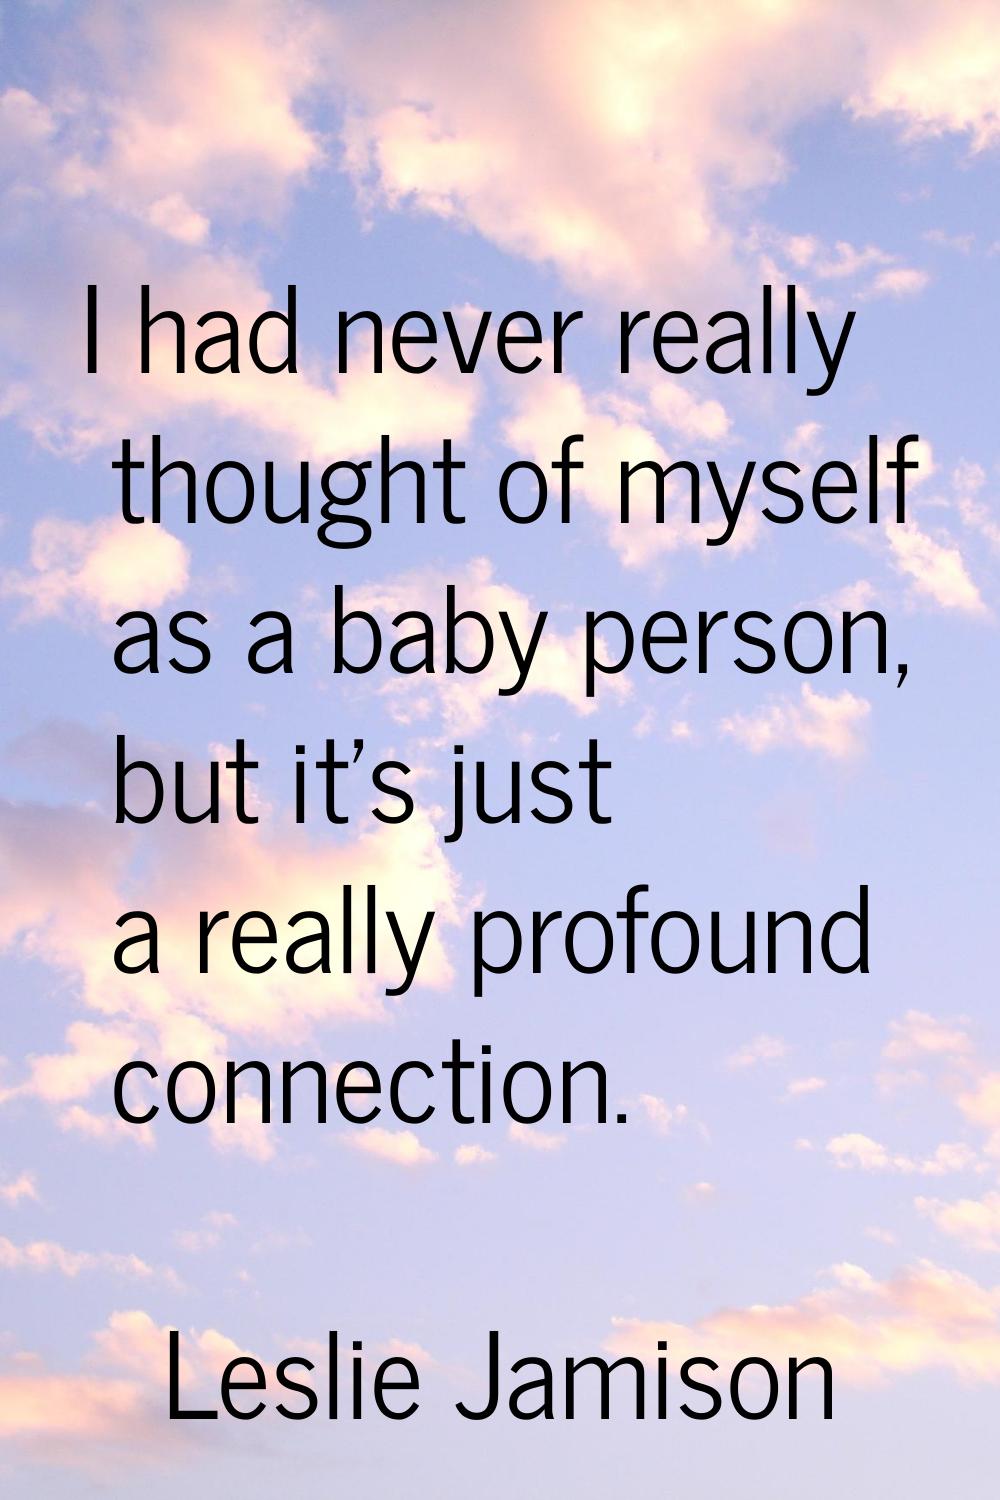 I had never really thought of myself as a baby person, but it's just a really profound connection.